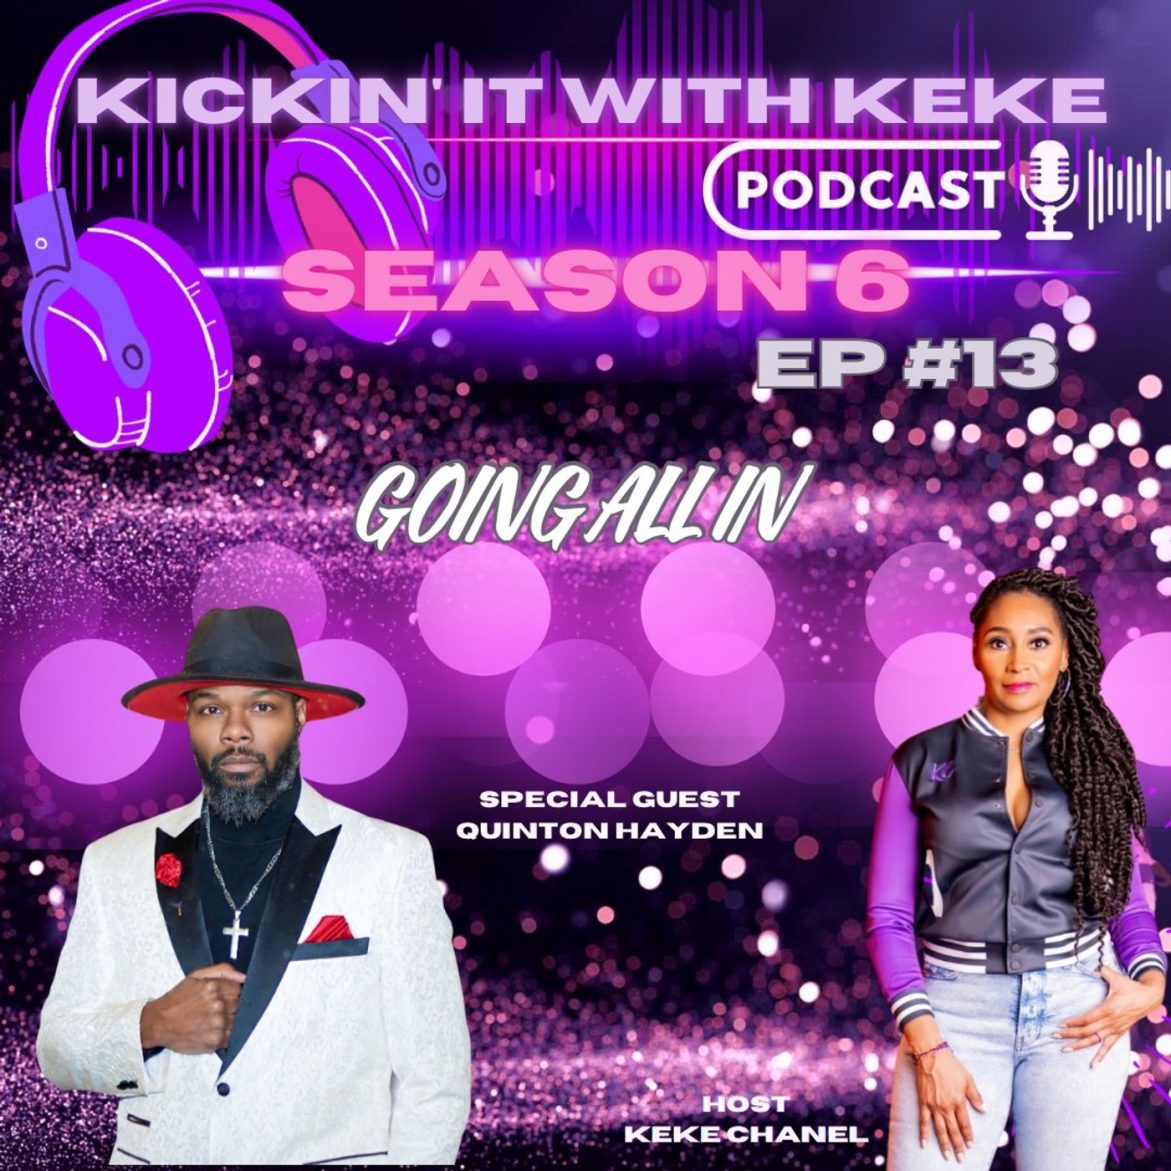 Black Podcasting - SEASON 6: Episode #13 "Going All IN"